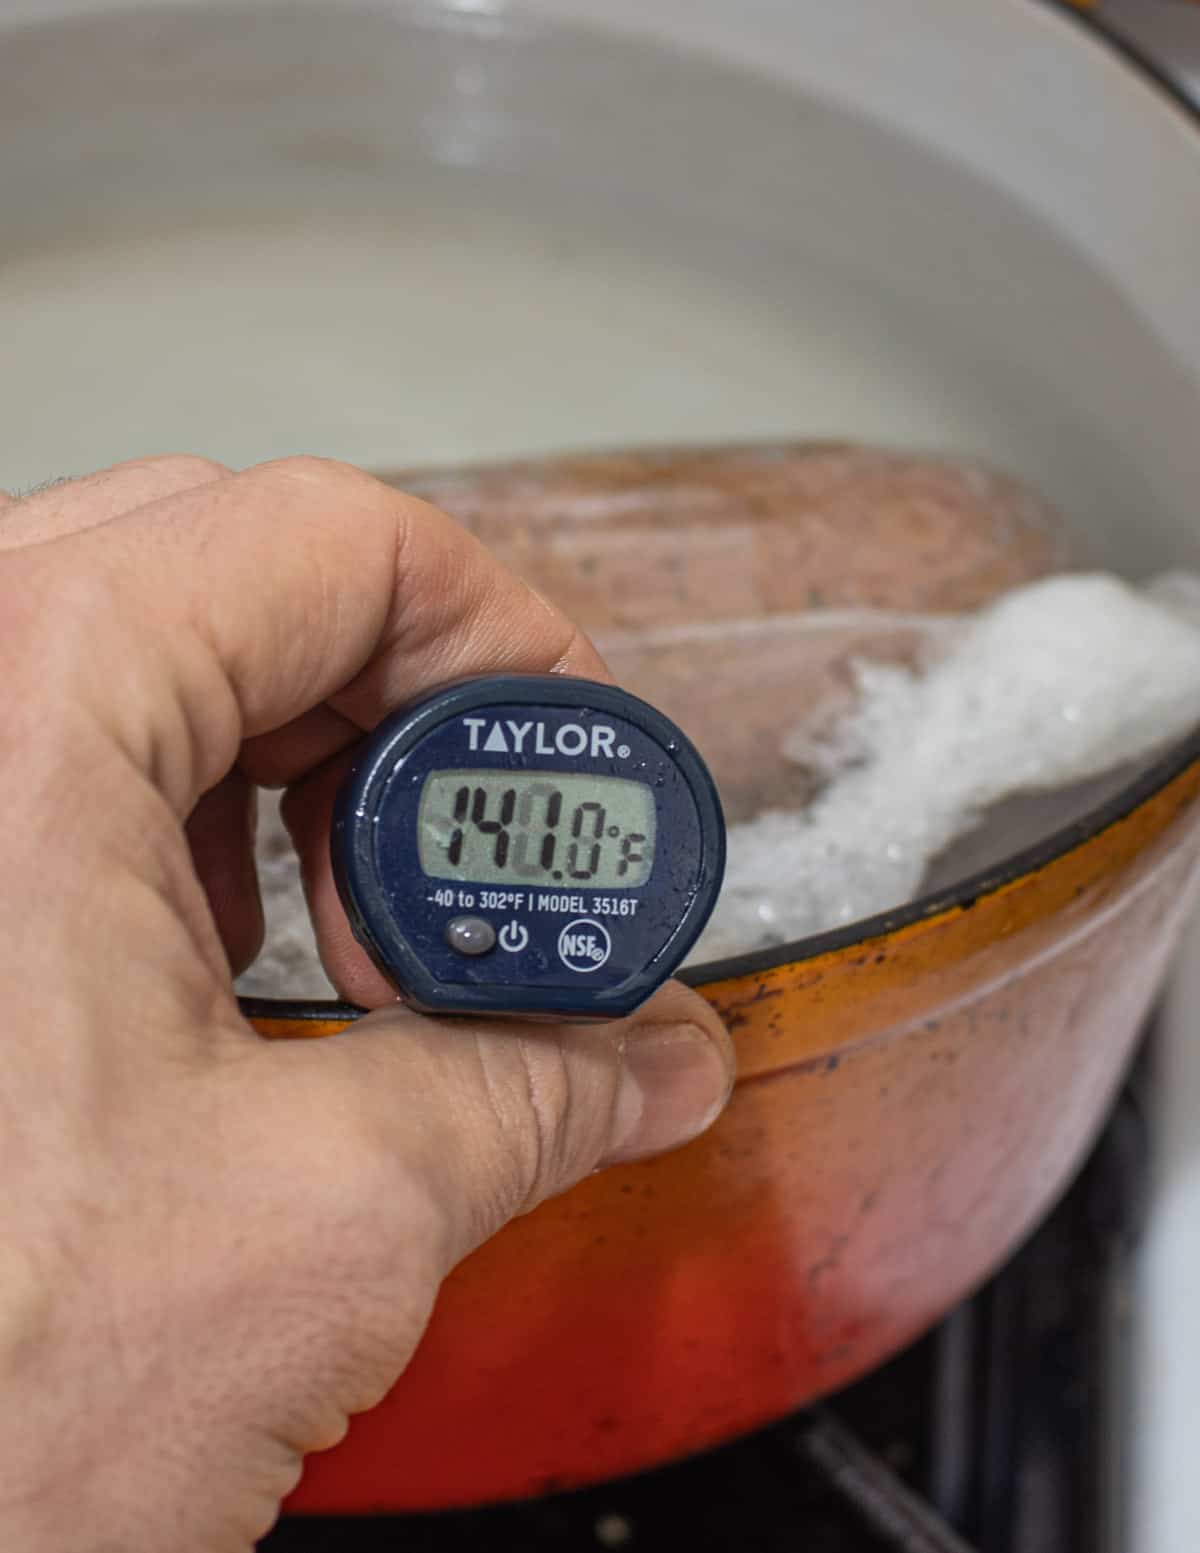 Testing the temperature of cooking braunshweiger using a digital thermometer. 